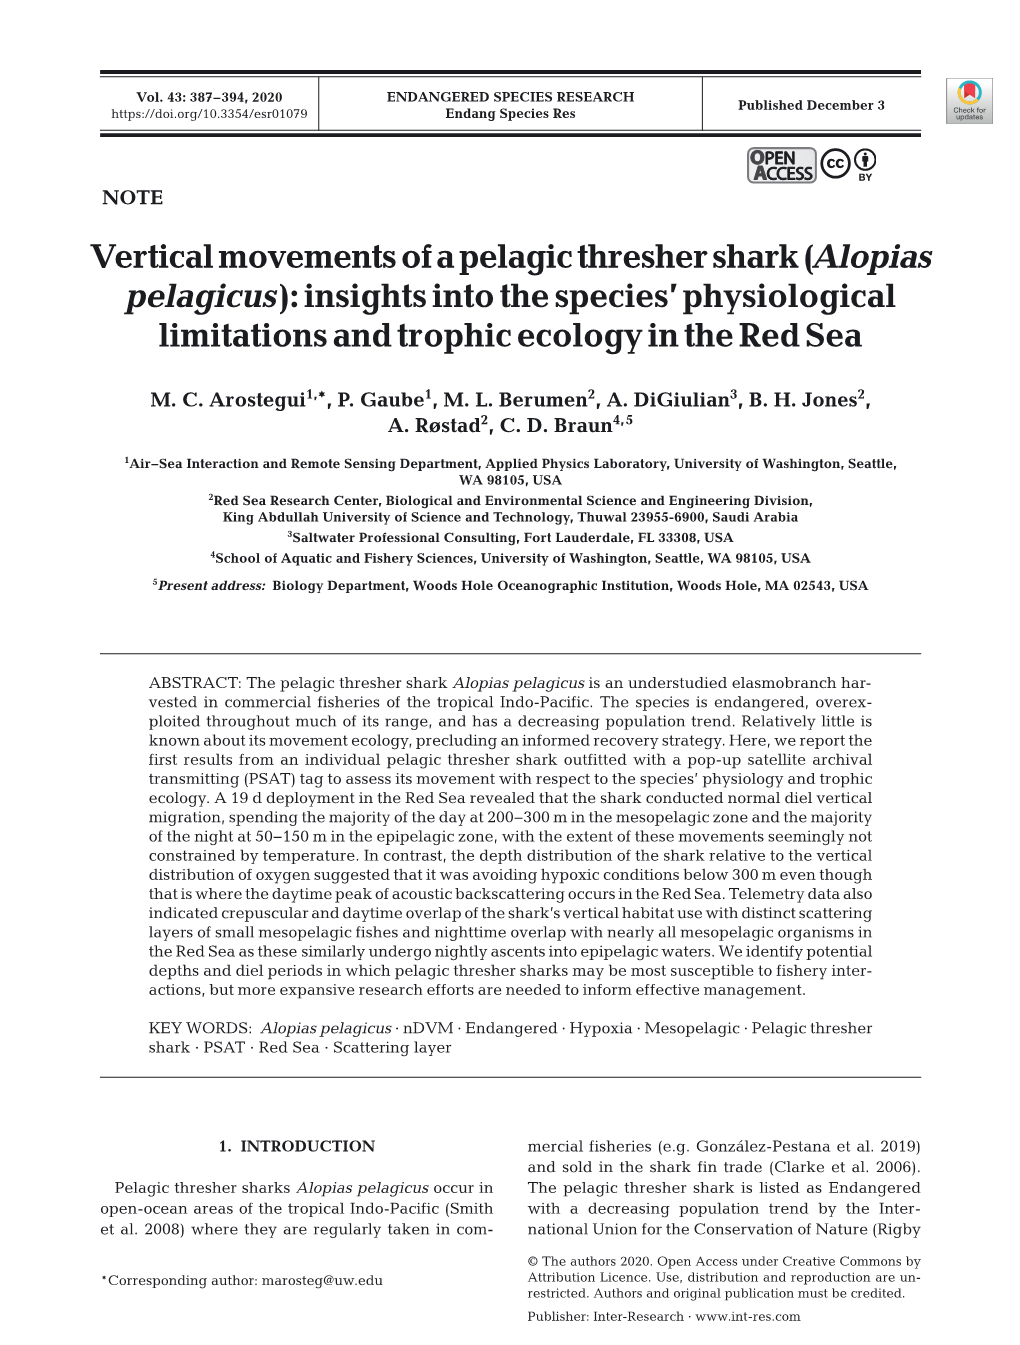 Vertical Movements of a Pelagic Thresher Shark (Alopias Pelagicus): Insights Into the Species’ Physiological Limitations and Trophic Ecology in the Red Sea